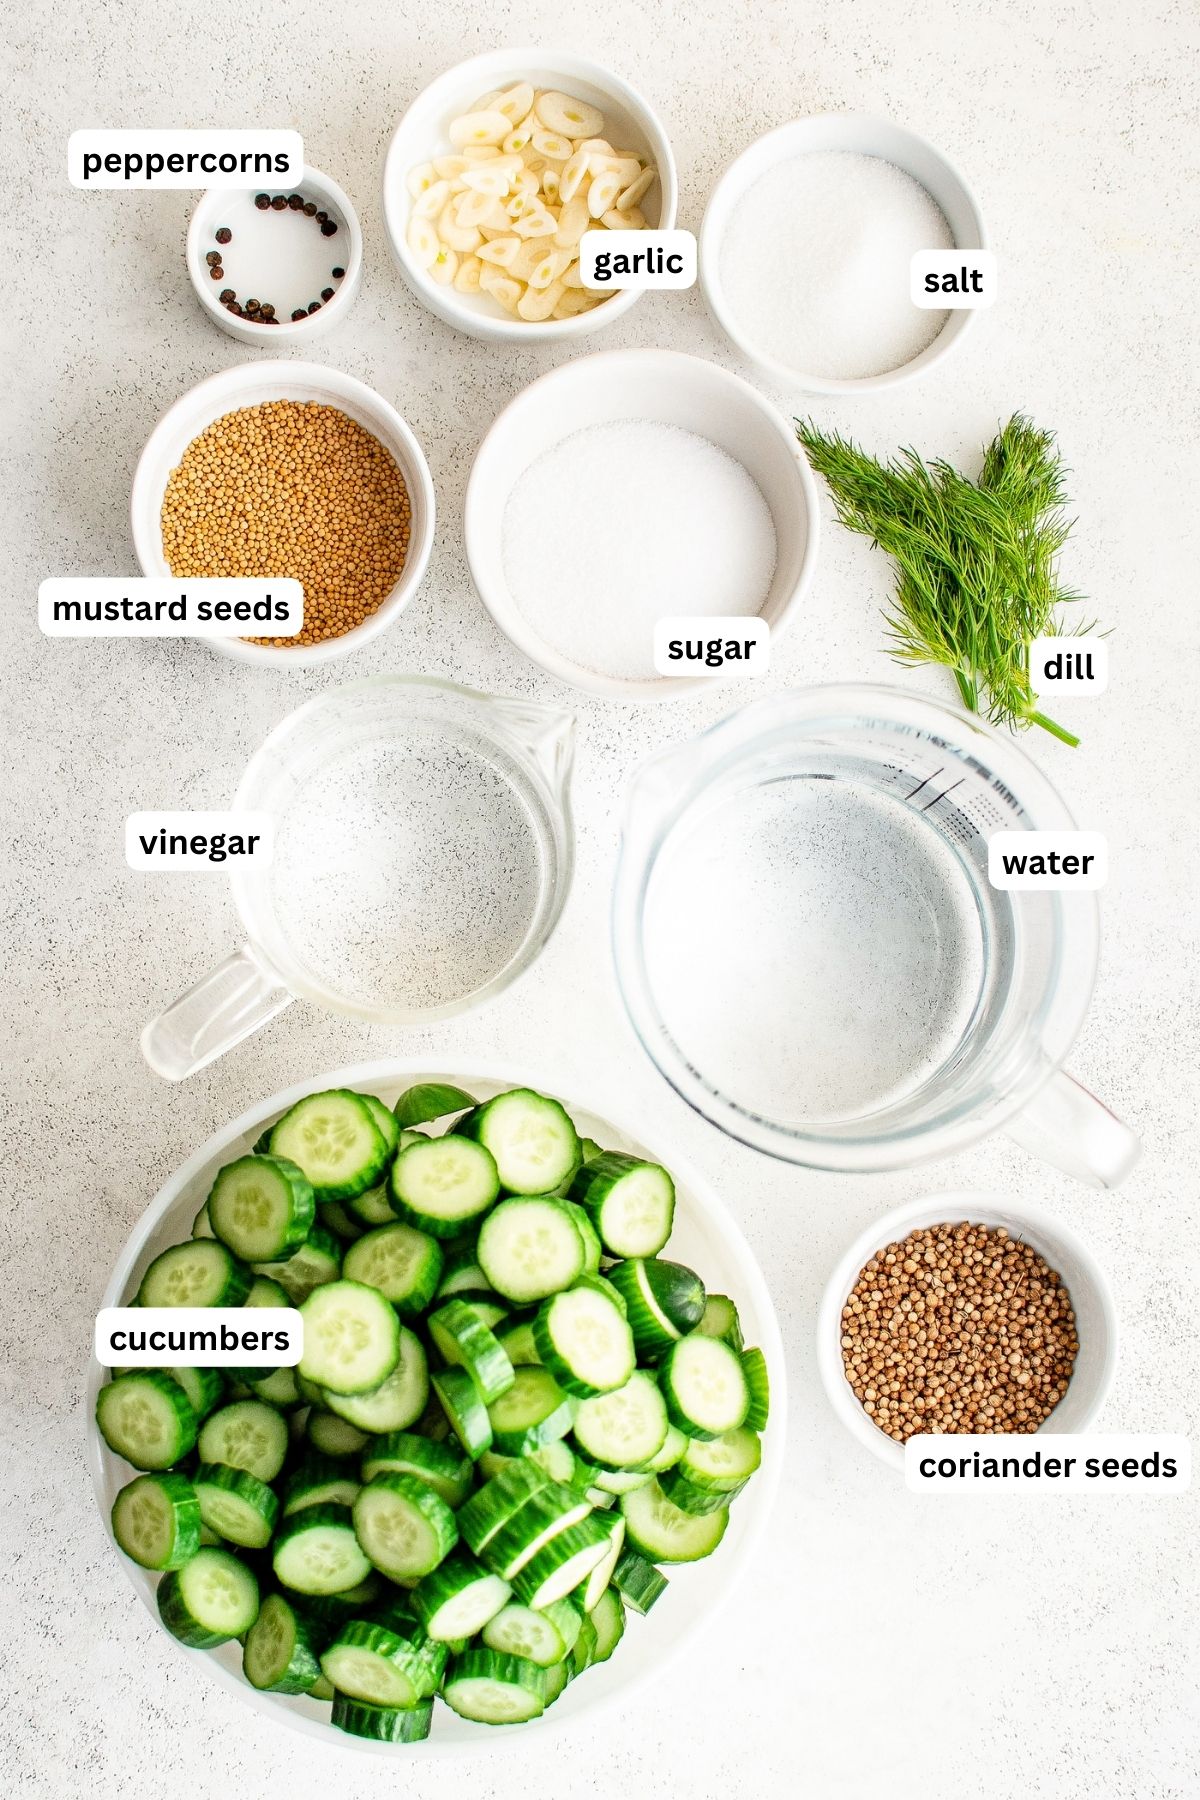 Ingredients for refrigerator pickles recipe arranged in bowls, from top to bottom: peppercorns, garlic, salt, mustard seeds, sugar, dill, vinegar, water, cucumbers and coriander seeds.